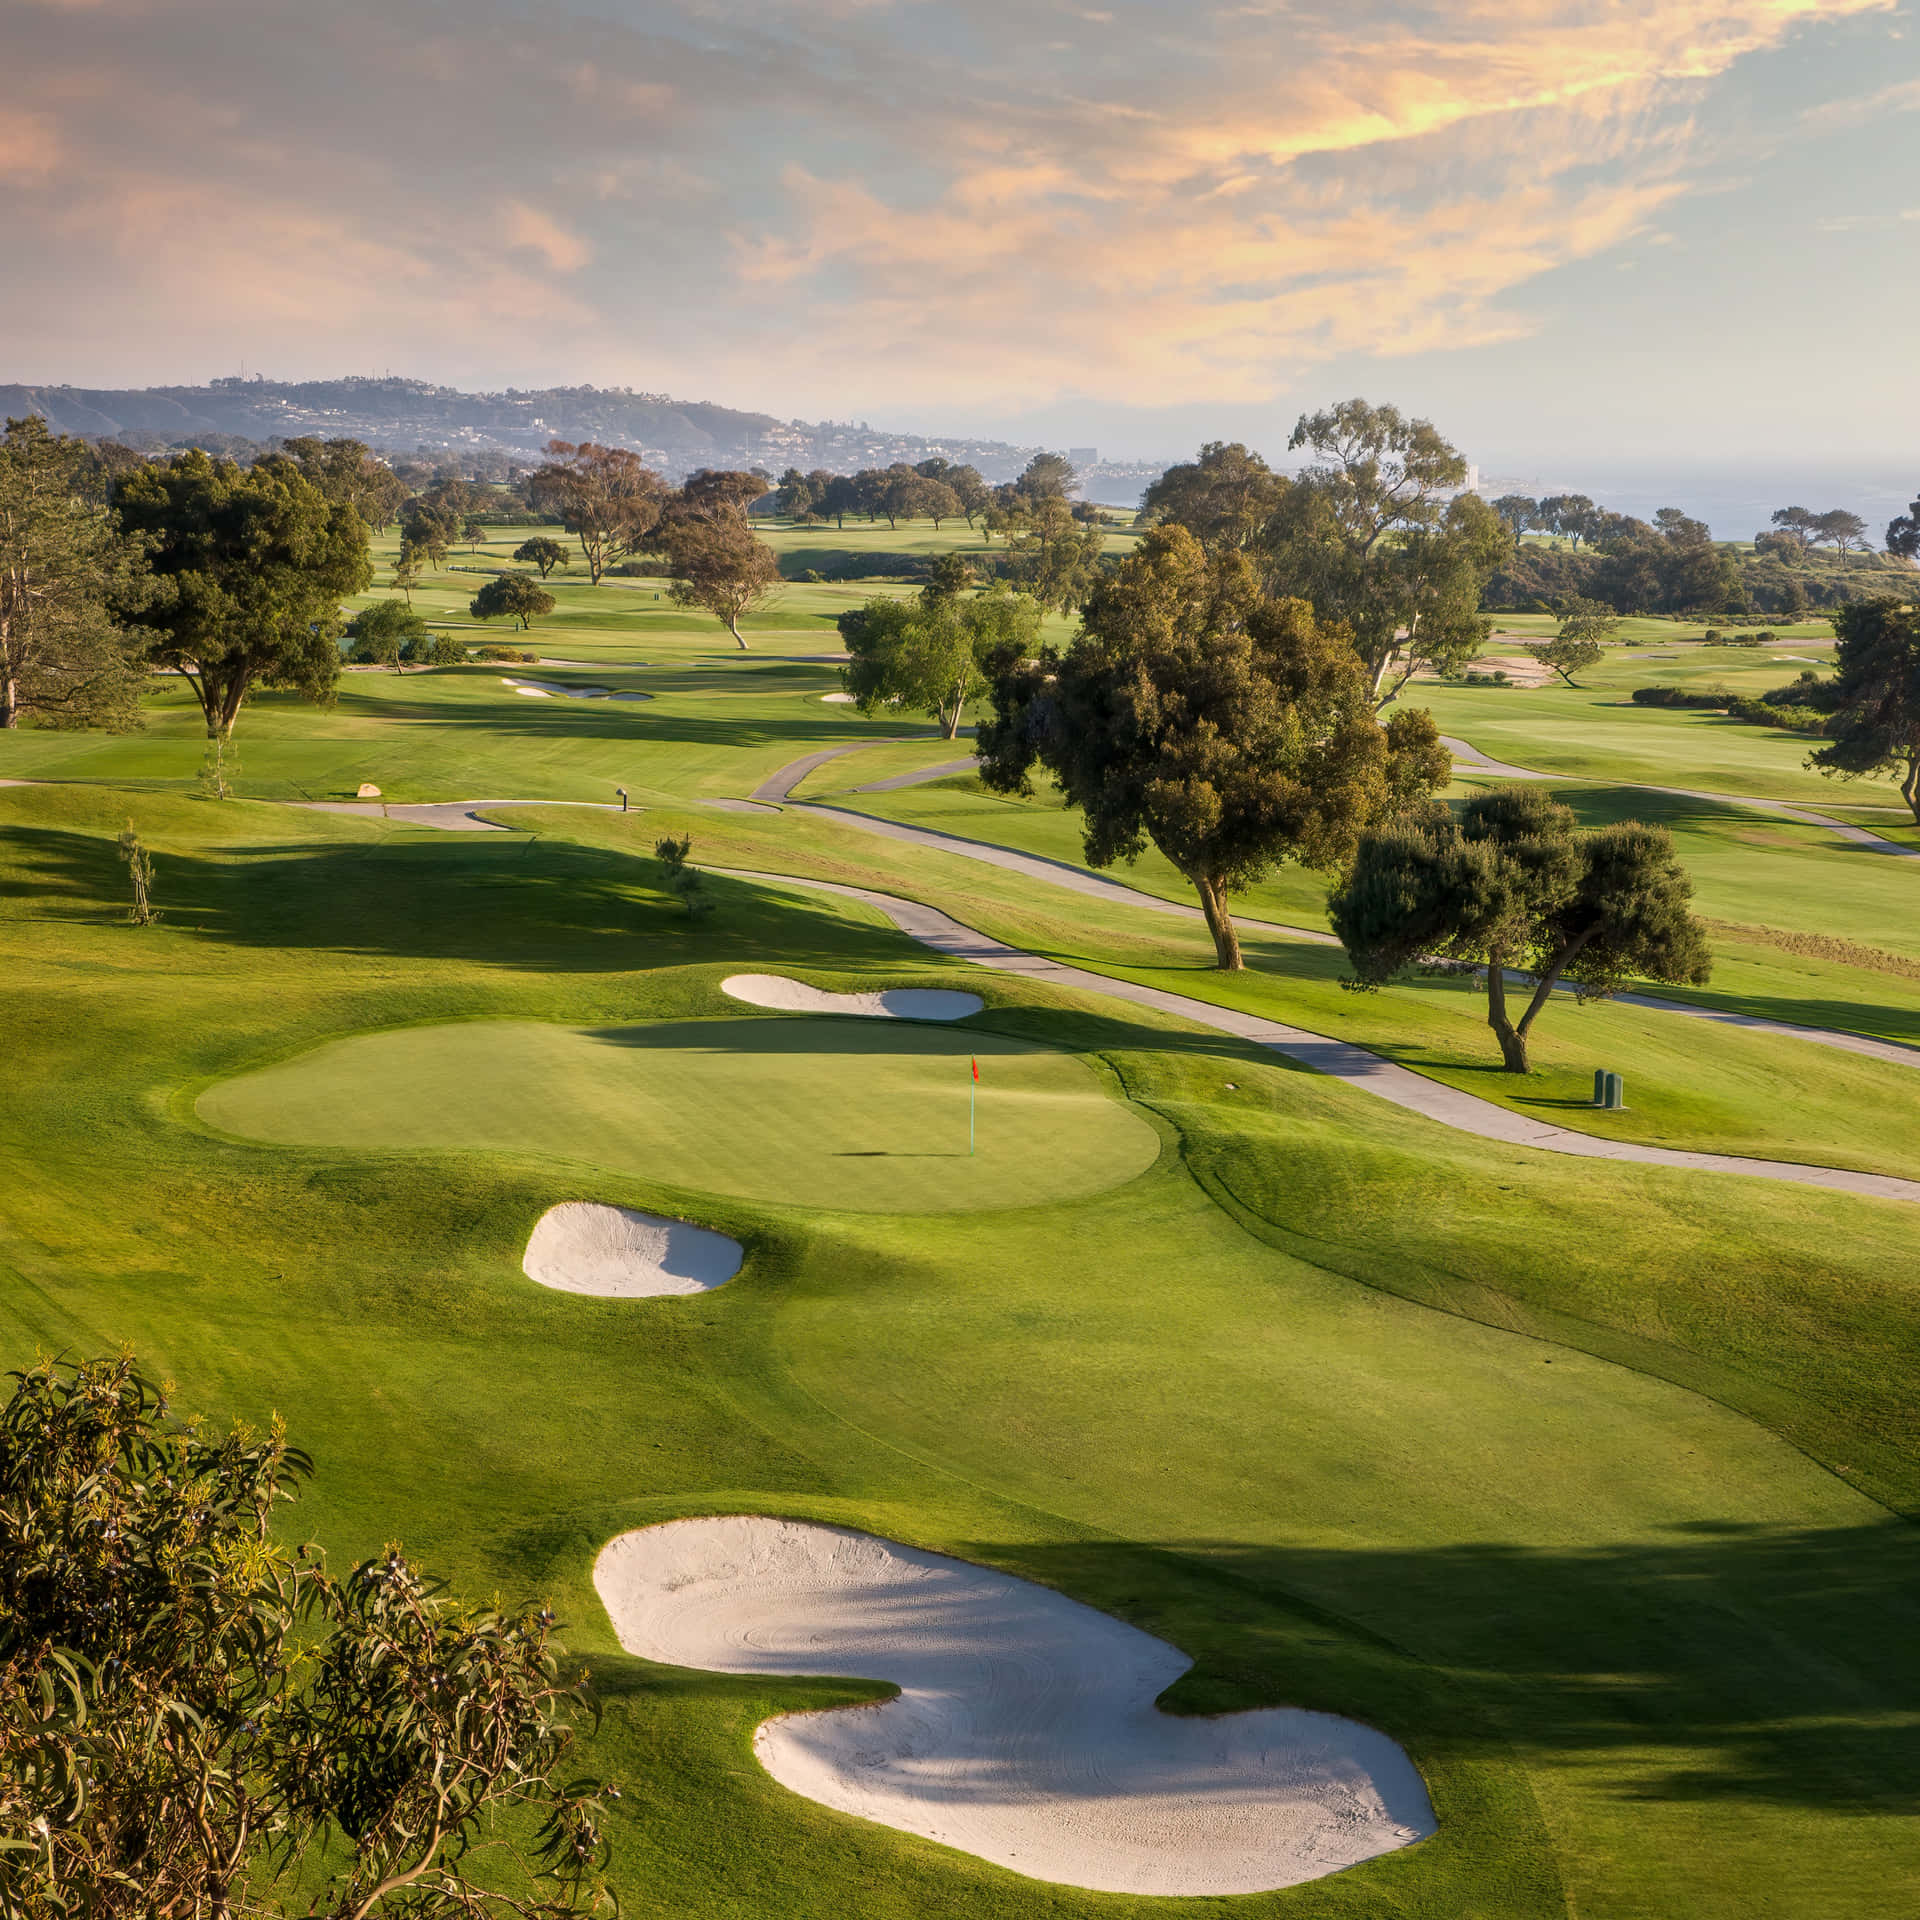 Challenge your golf game on a picturesque course